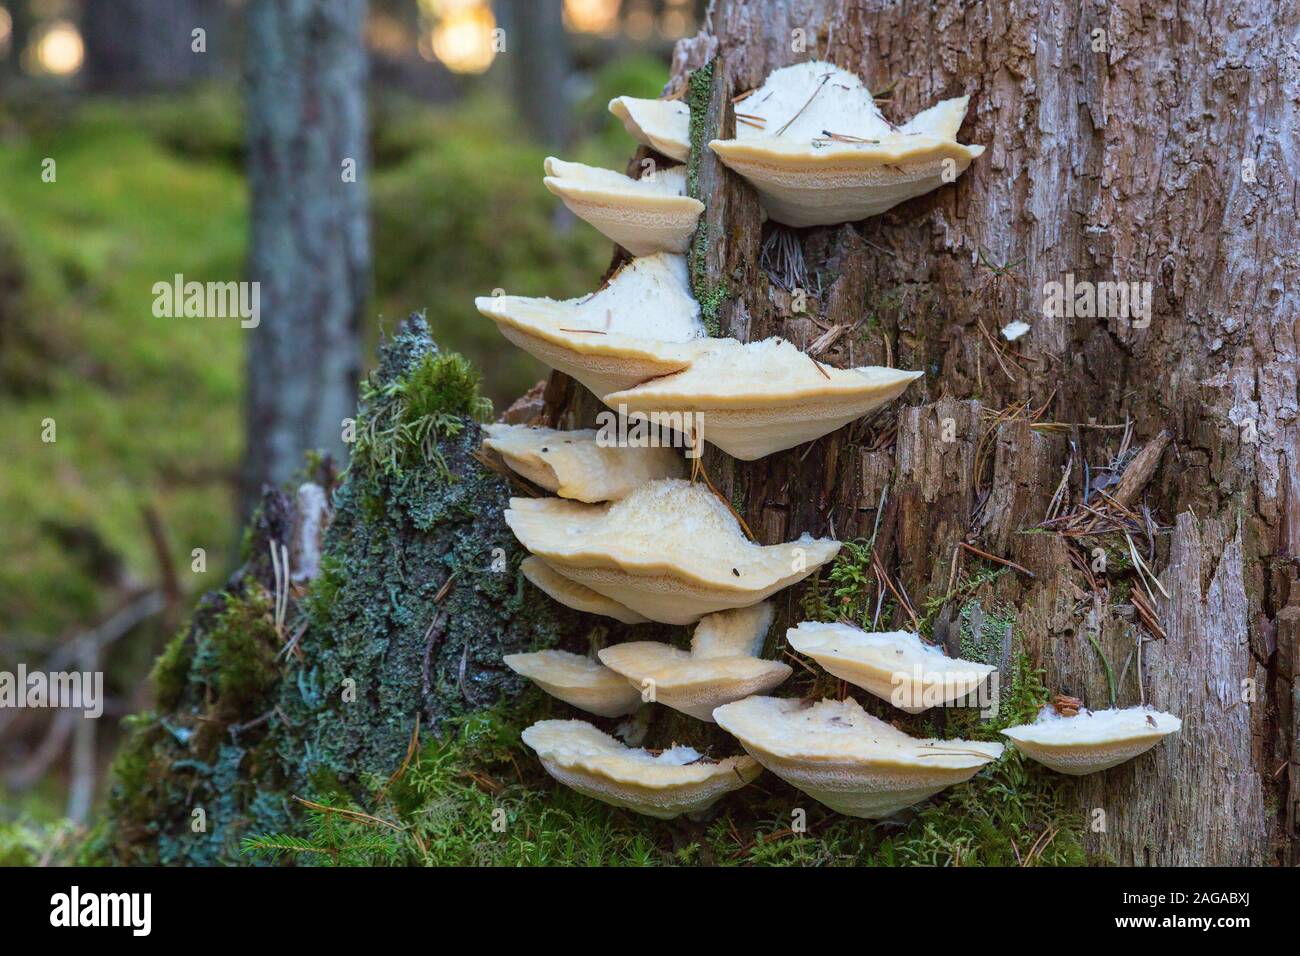 White mushroom on a tree trunk in a forest Stock Photo